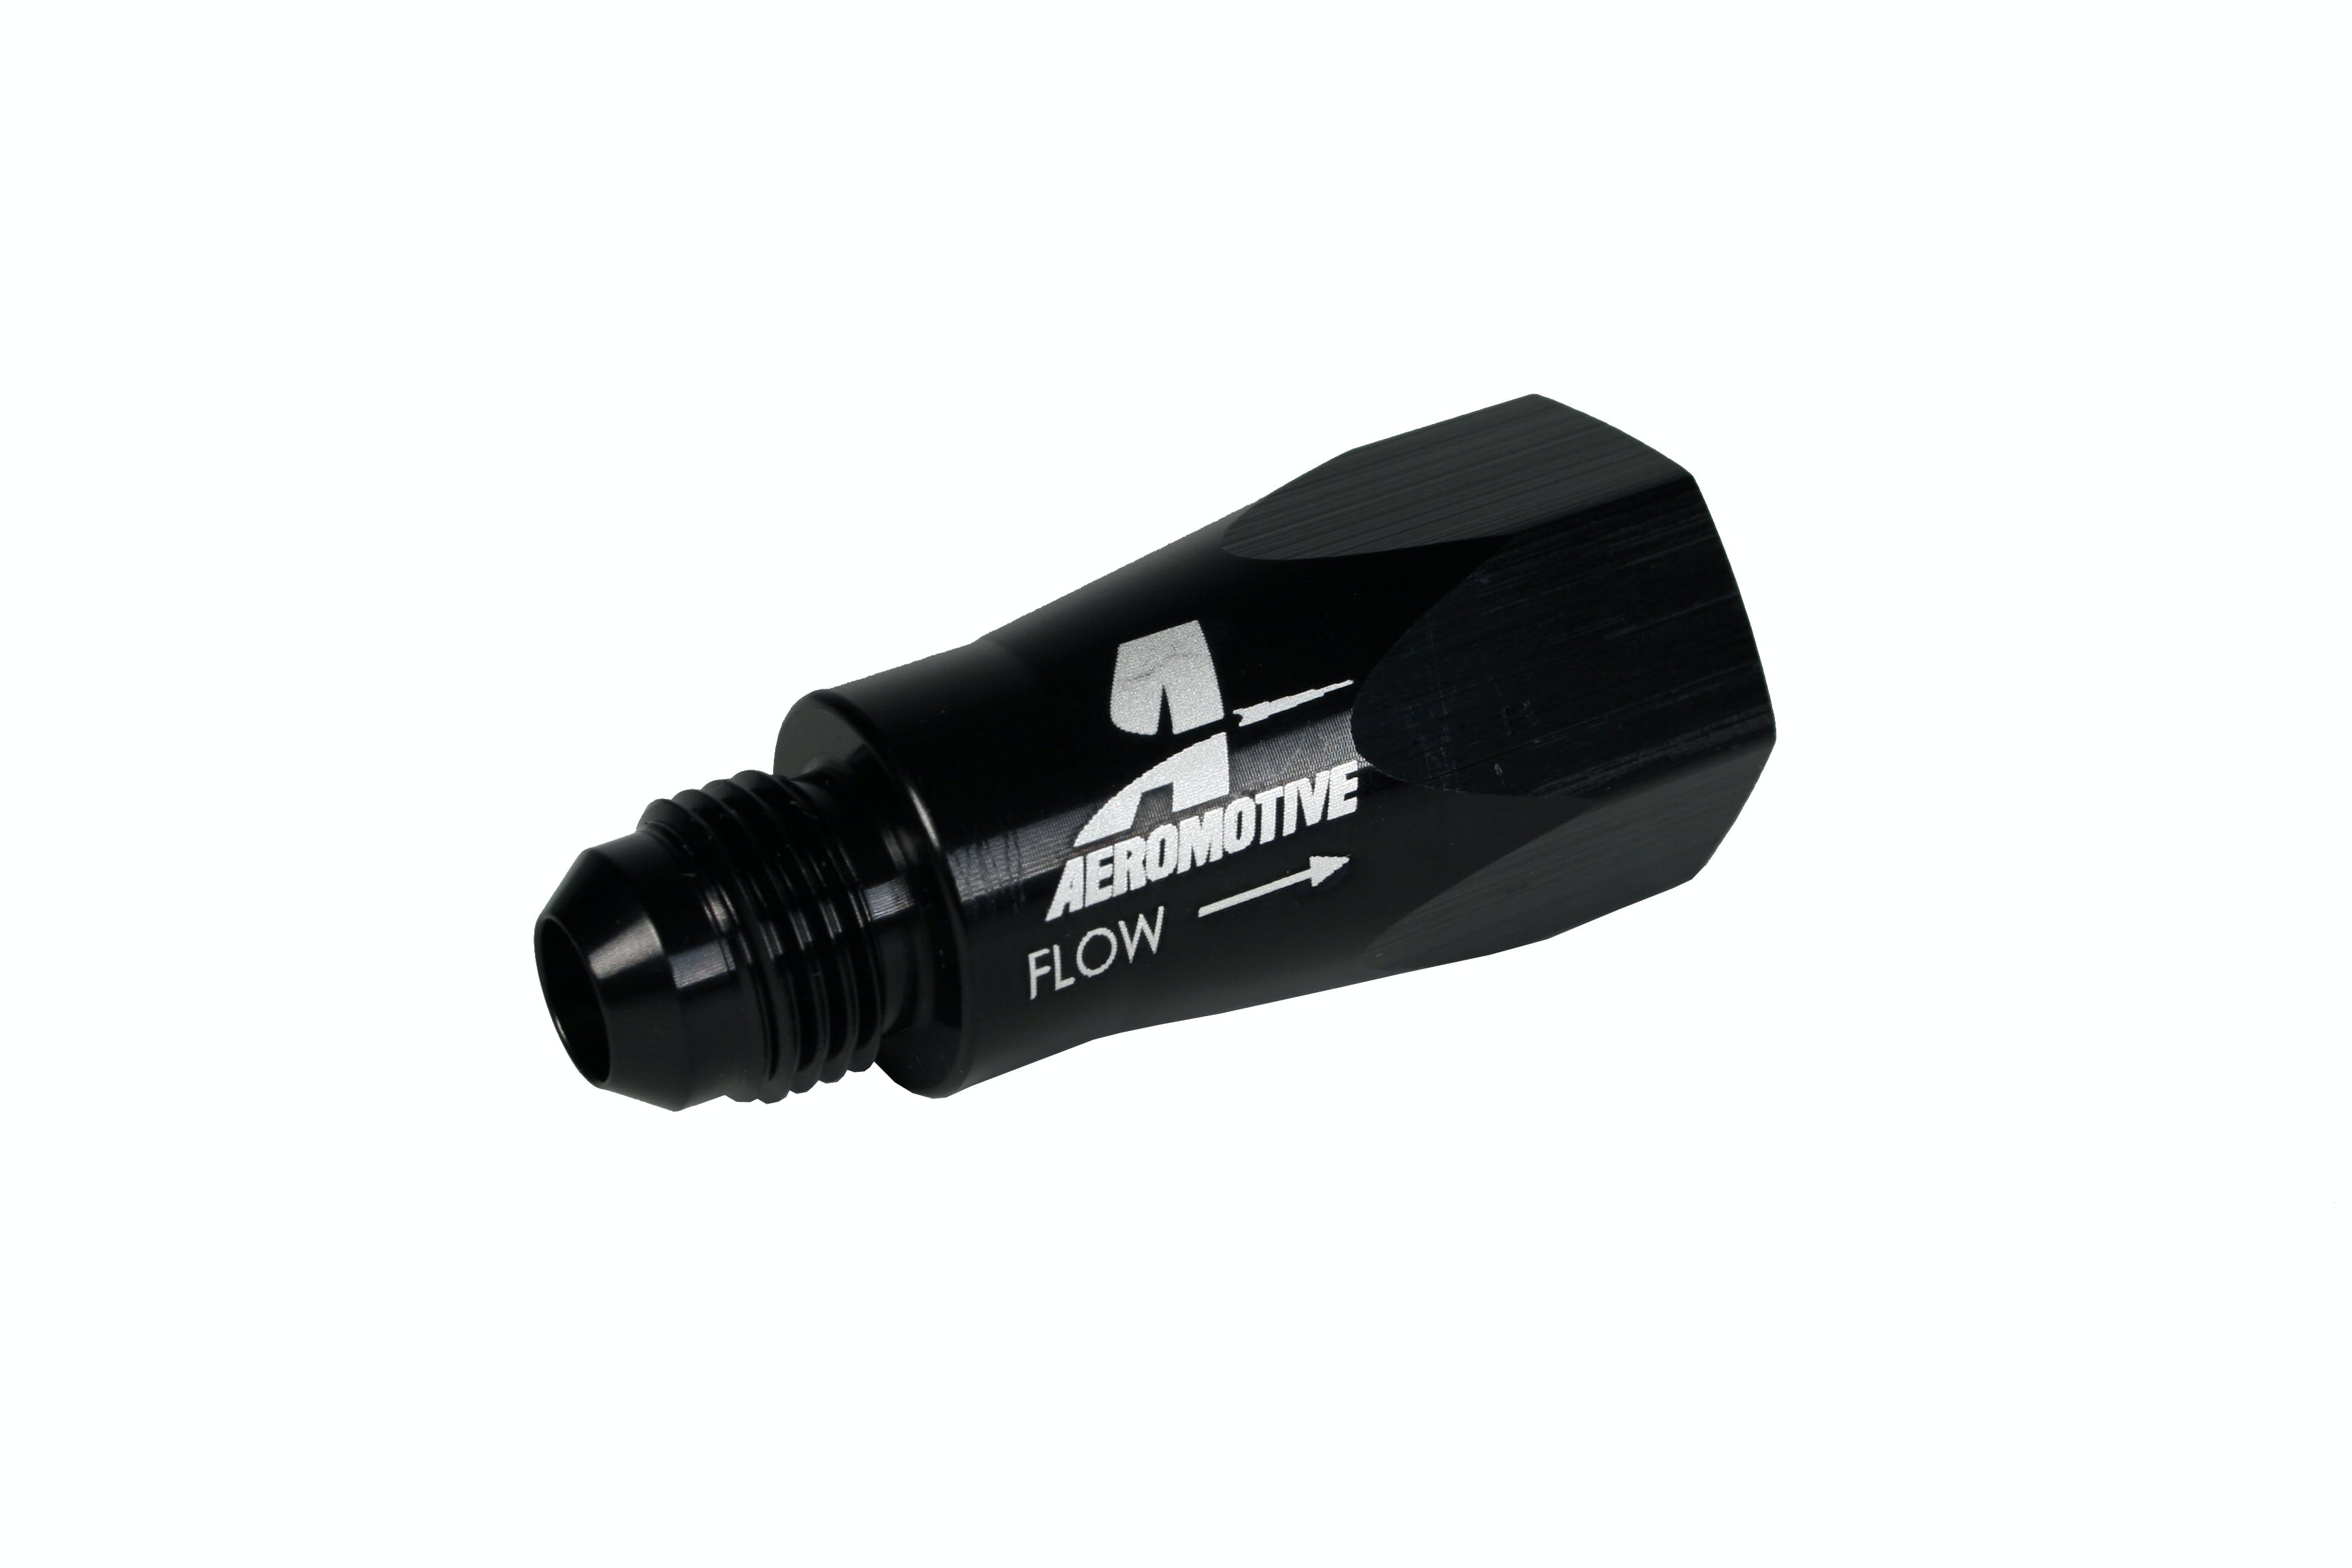 Aeromotive Fuel System 15106 In-Line Full Flow Check Valve (Male -6 AN inlet, Female -6 AN outlet)